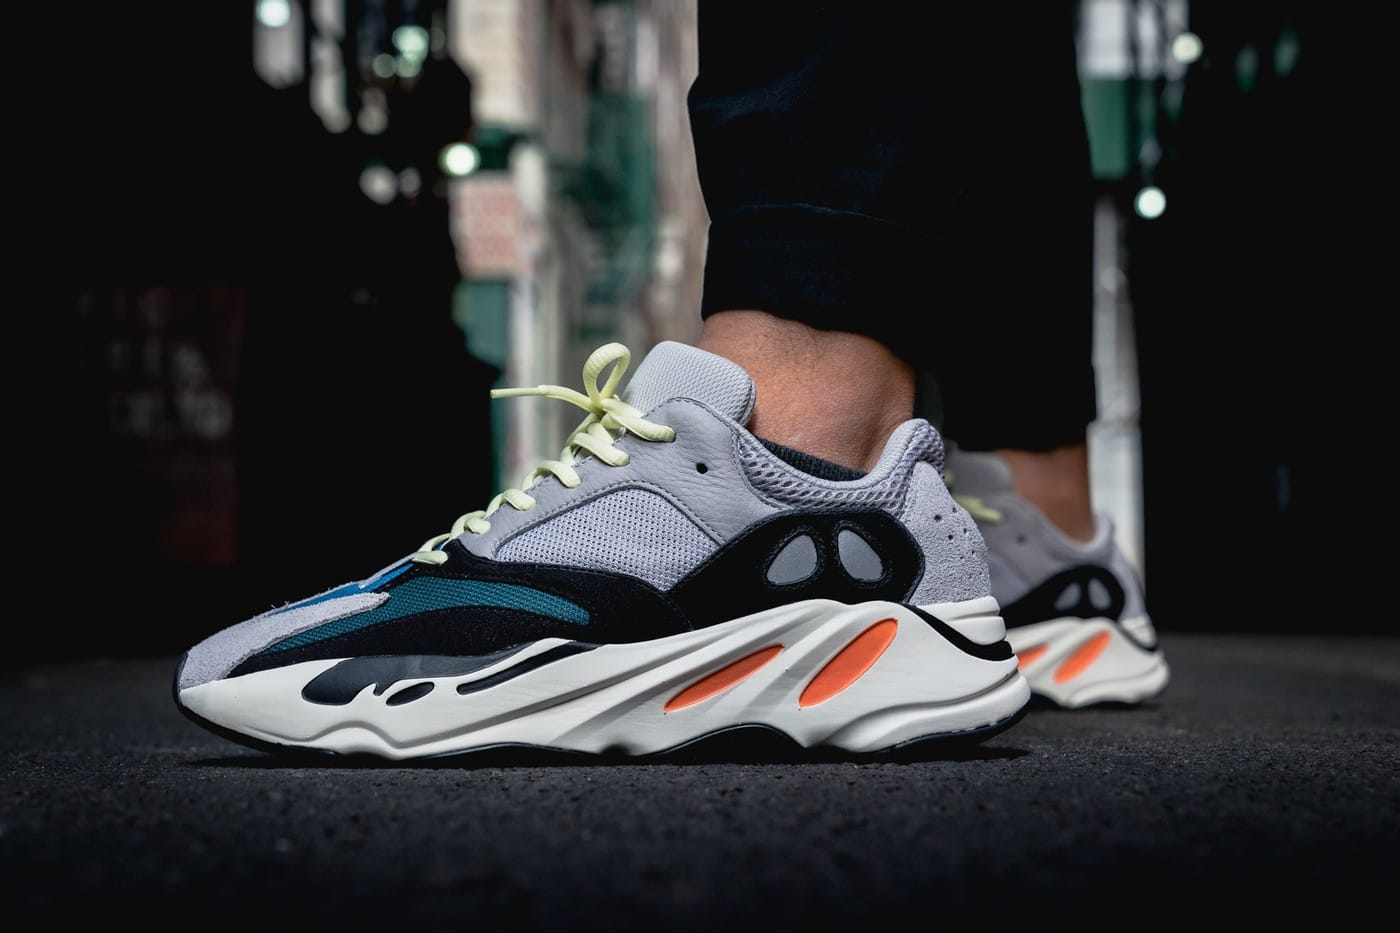 yeezy boost 700 wave runner fit